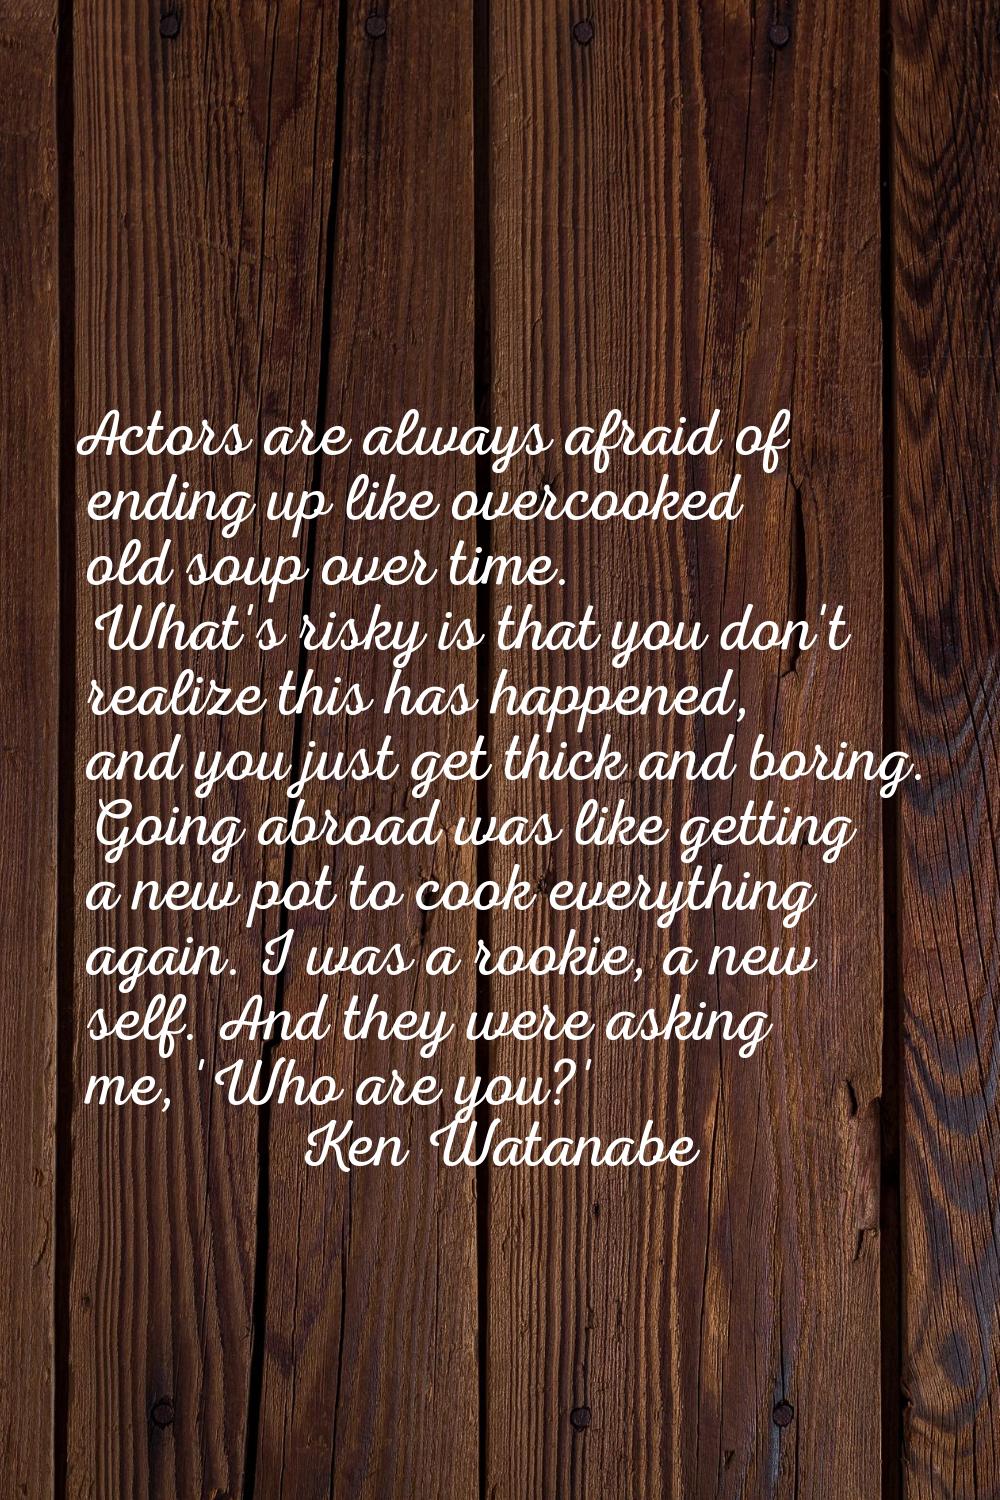 Actors are always afraid of ending up like overcooked old soup over time. What's risky is that you 